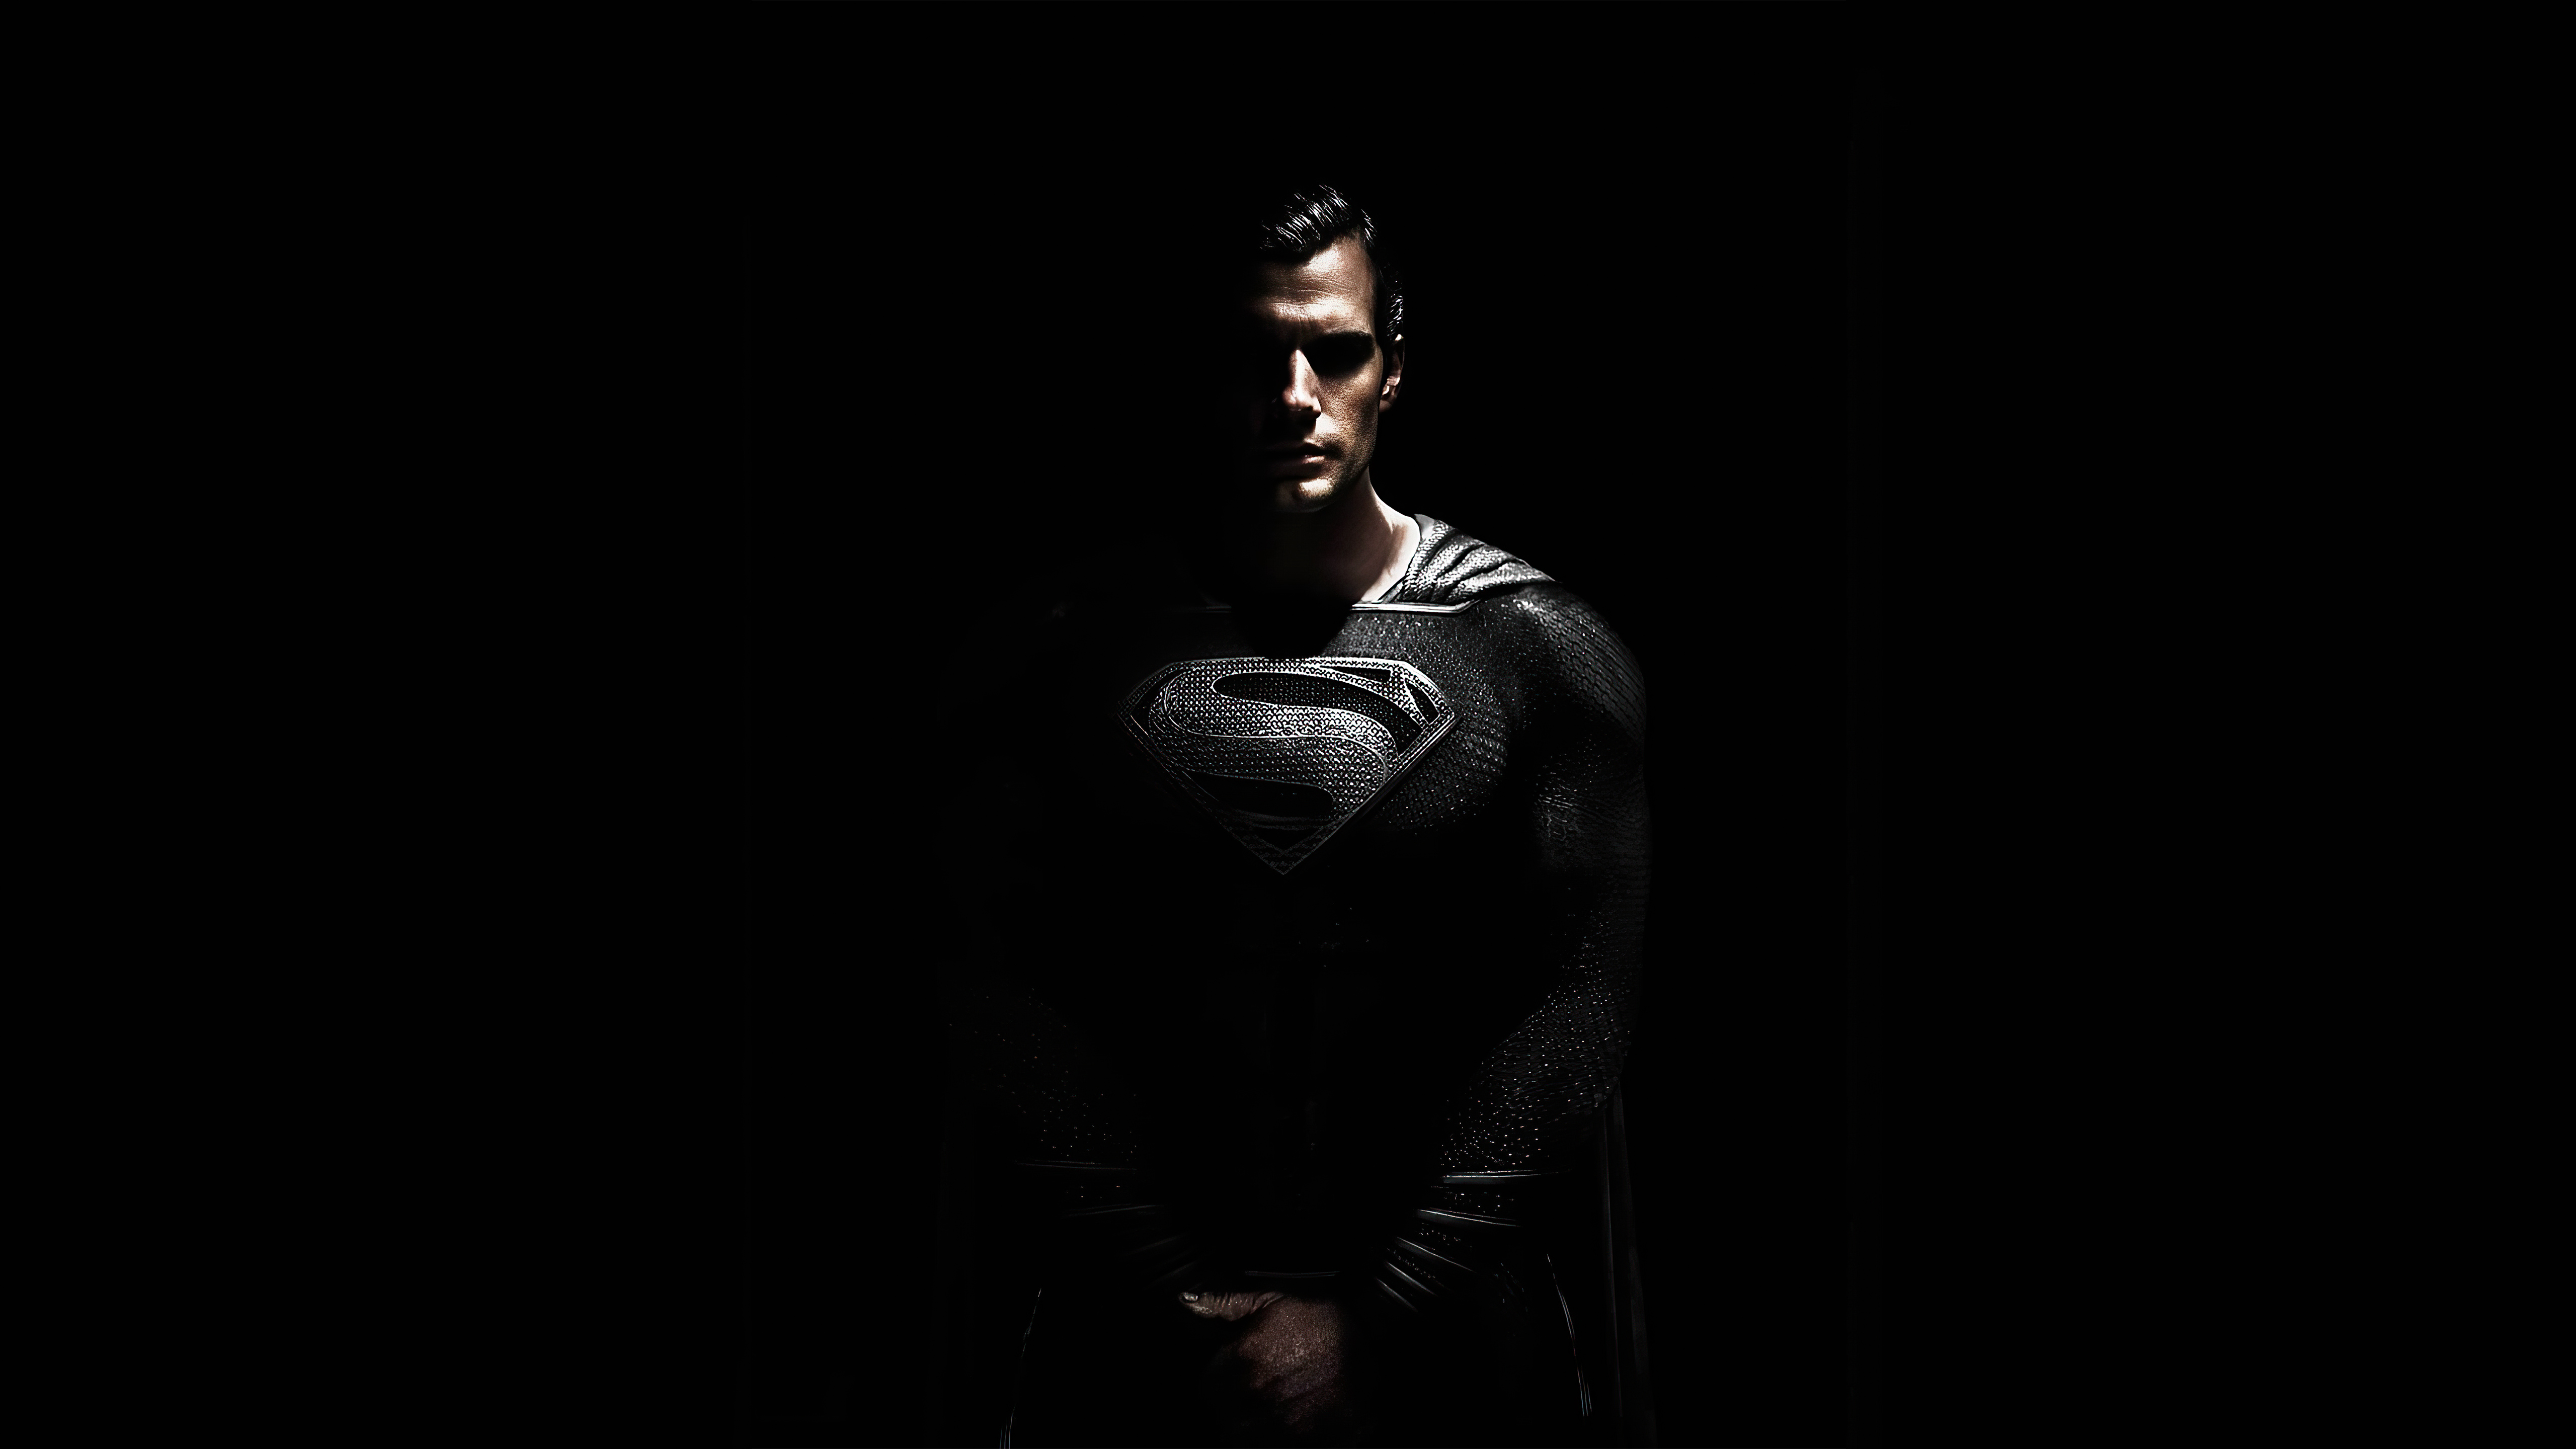 Black Suit Superman 4k 2020, HD Superheroes, 4k Wallpapers, Images,  Backgrounds, Photos and Pictures